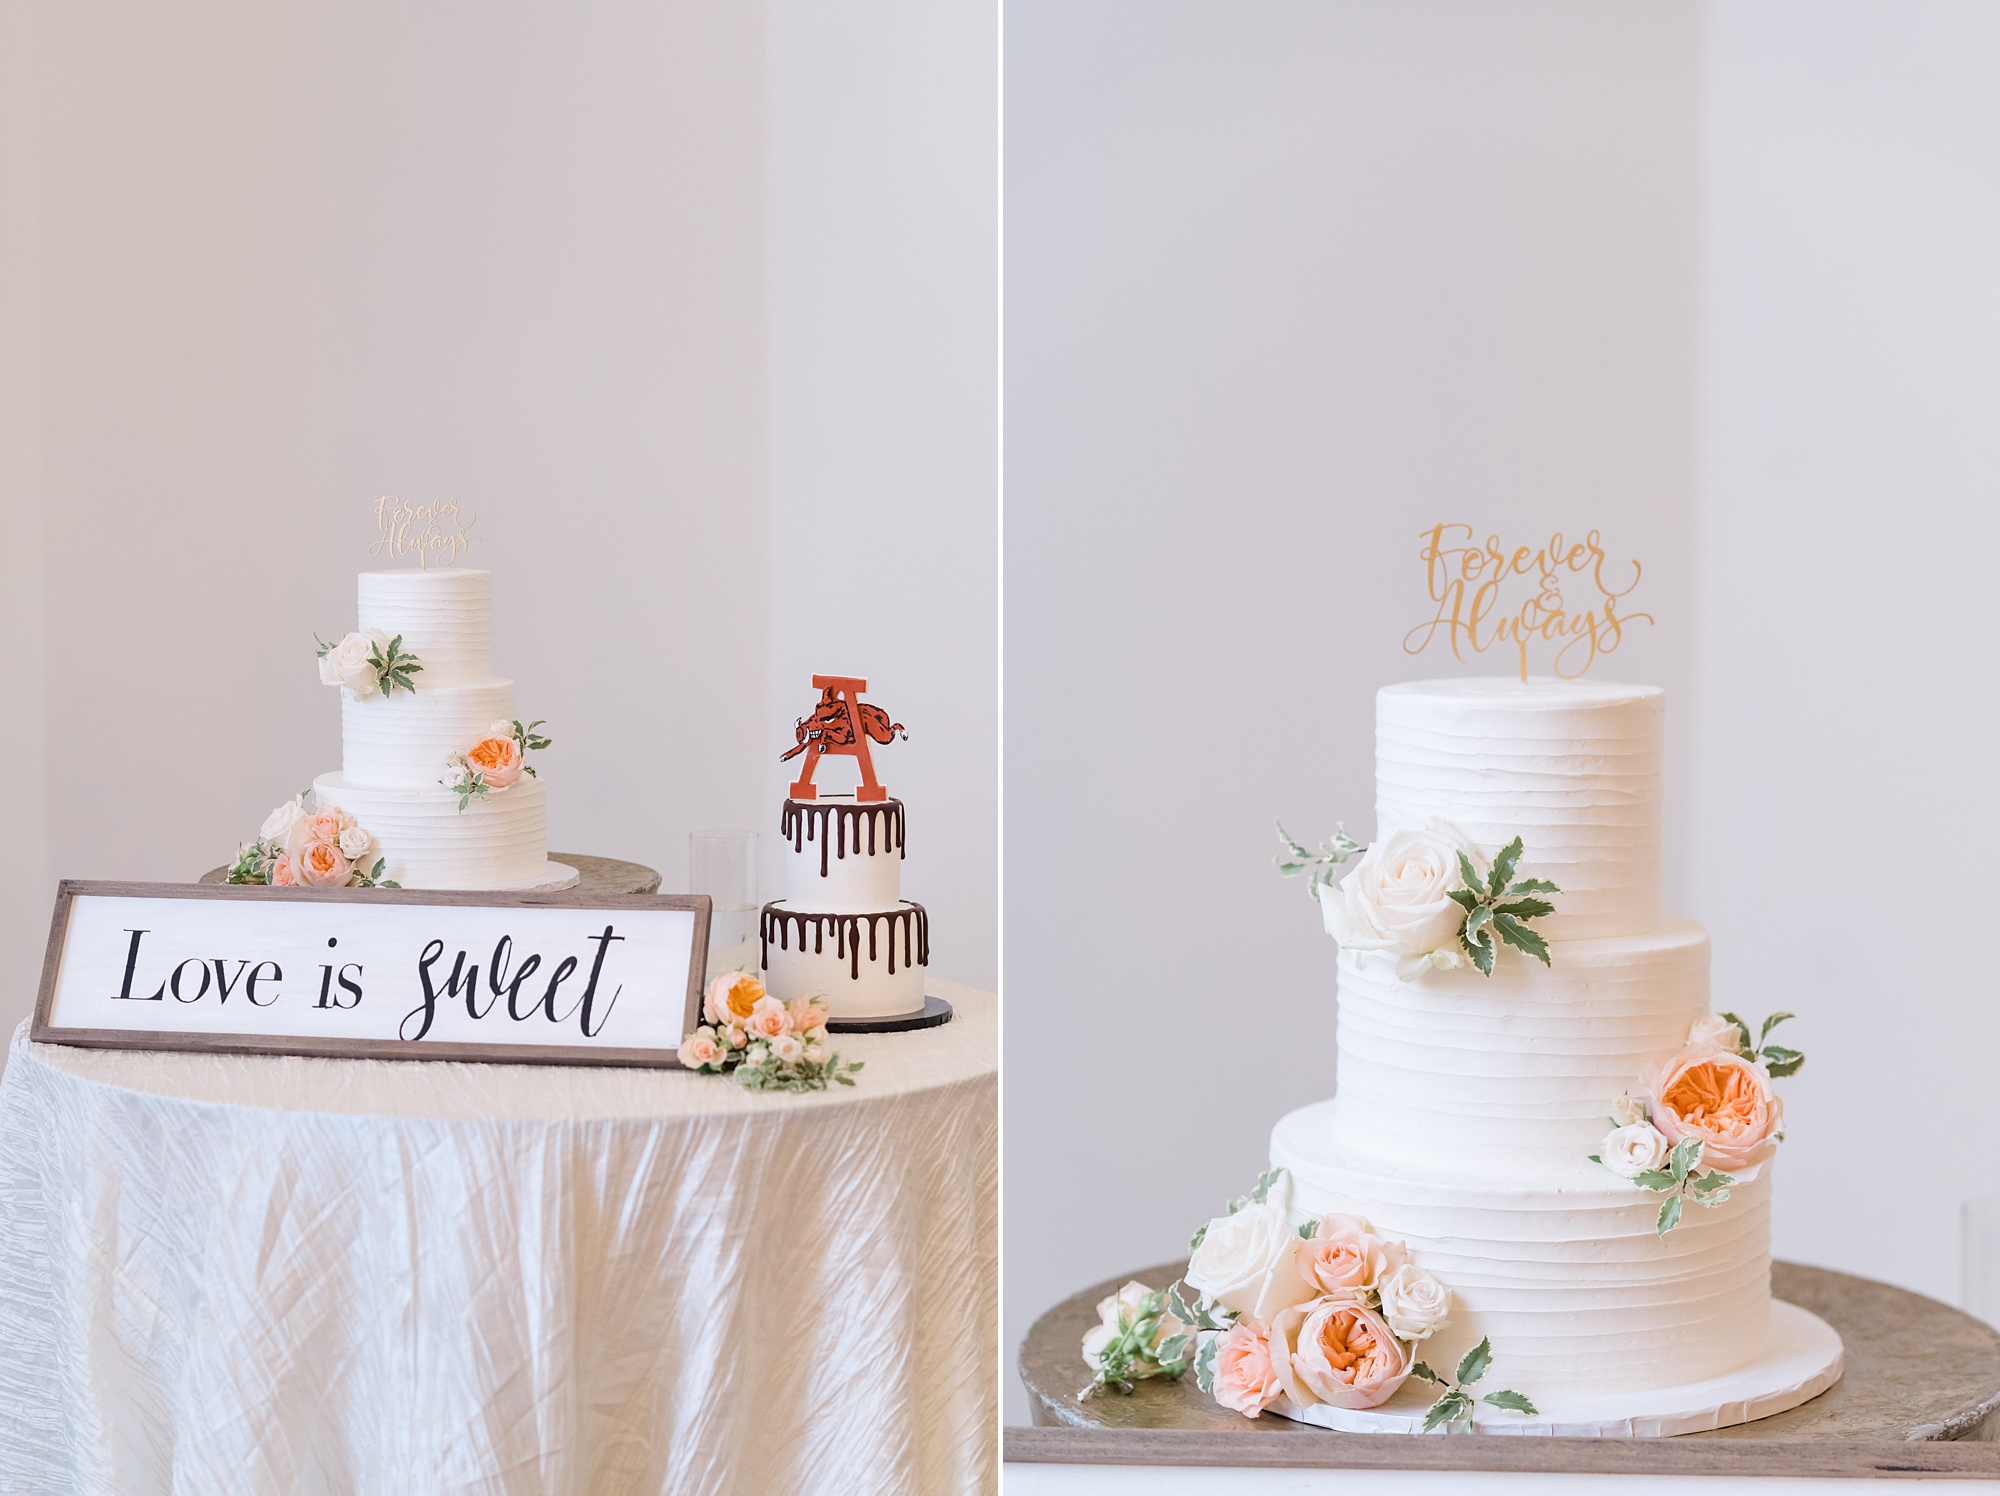 cake table with tiered wedding cake and groom's cake